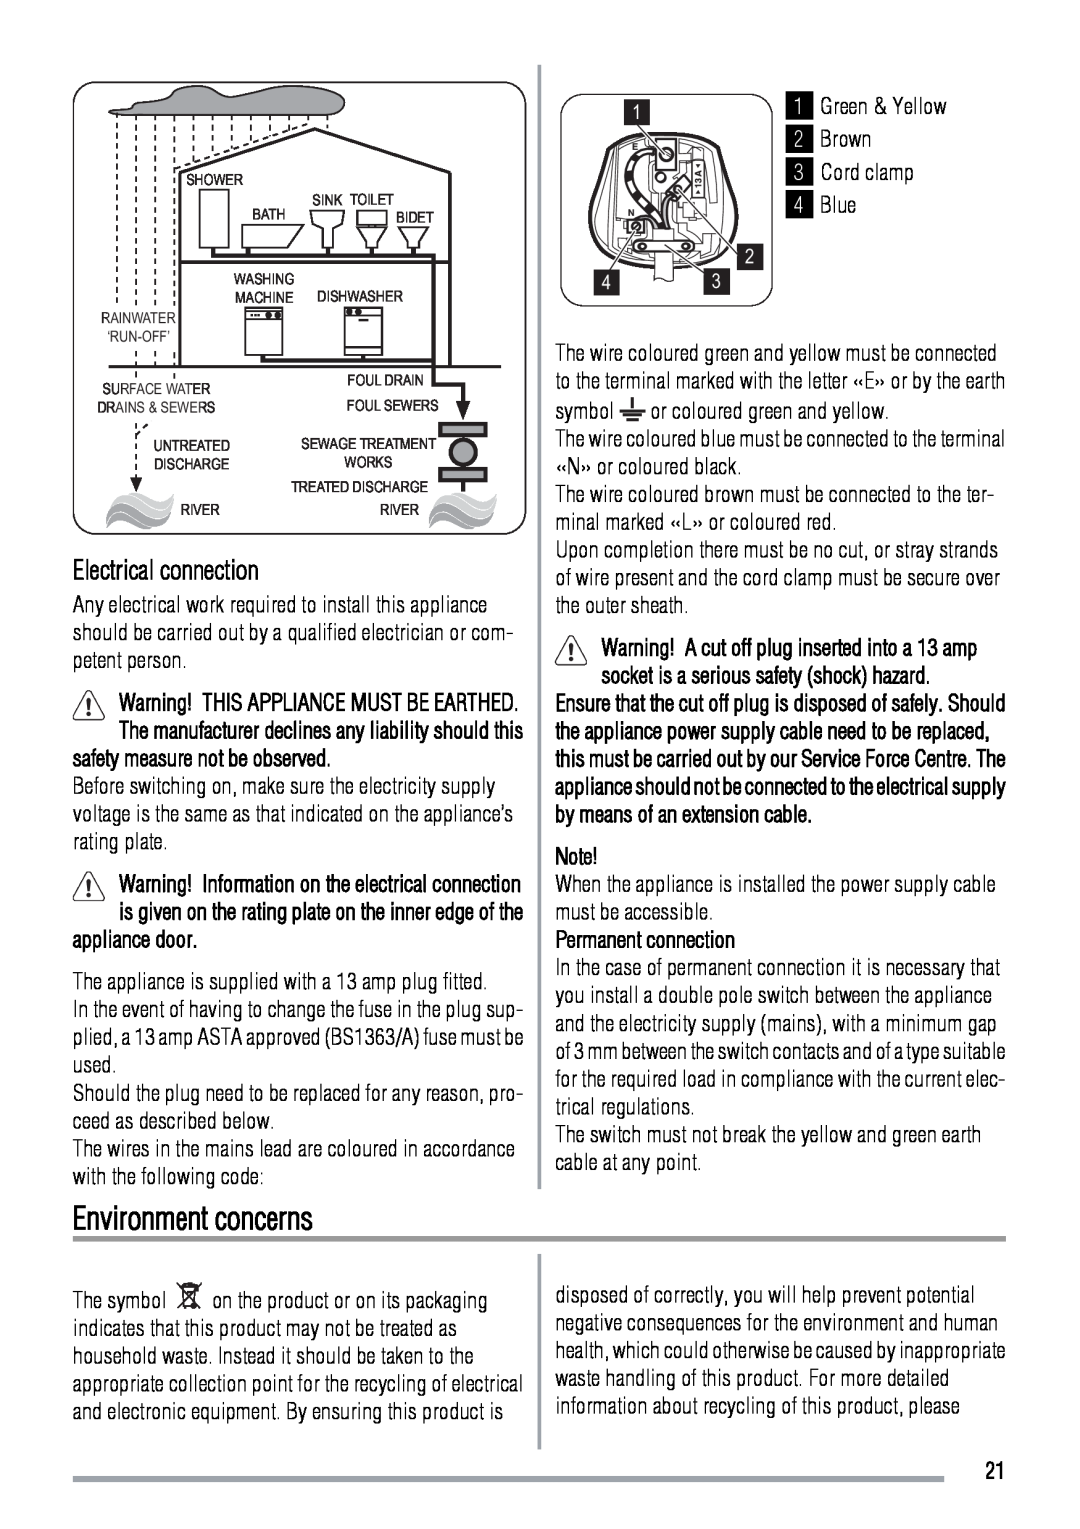 Zanussi 192994960-00-202009 Environment concerns, Electrical connection, safety measure not be observed, appliance door 